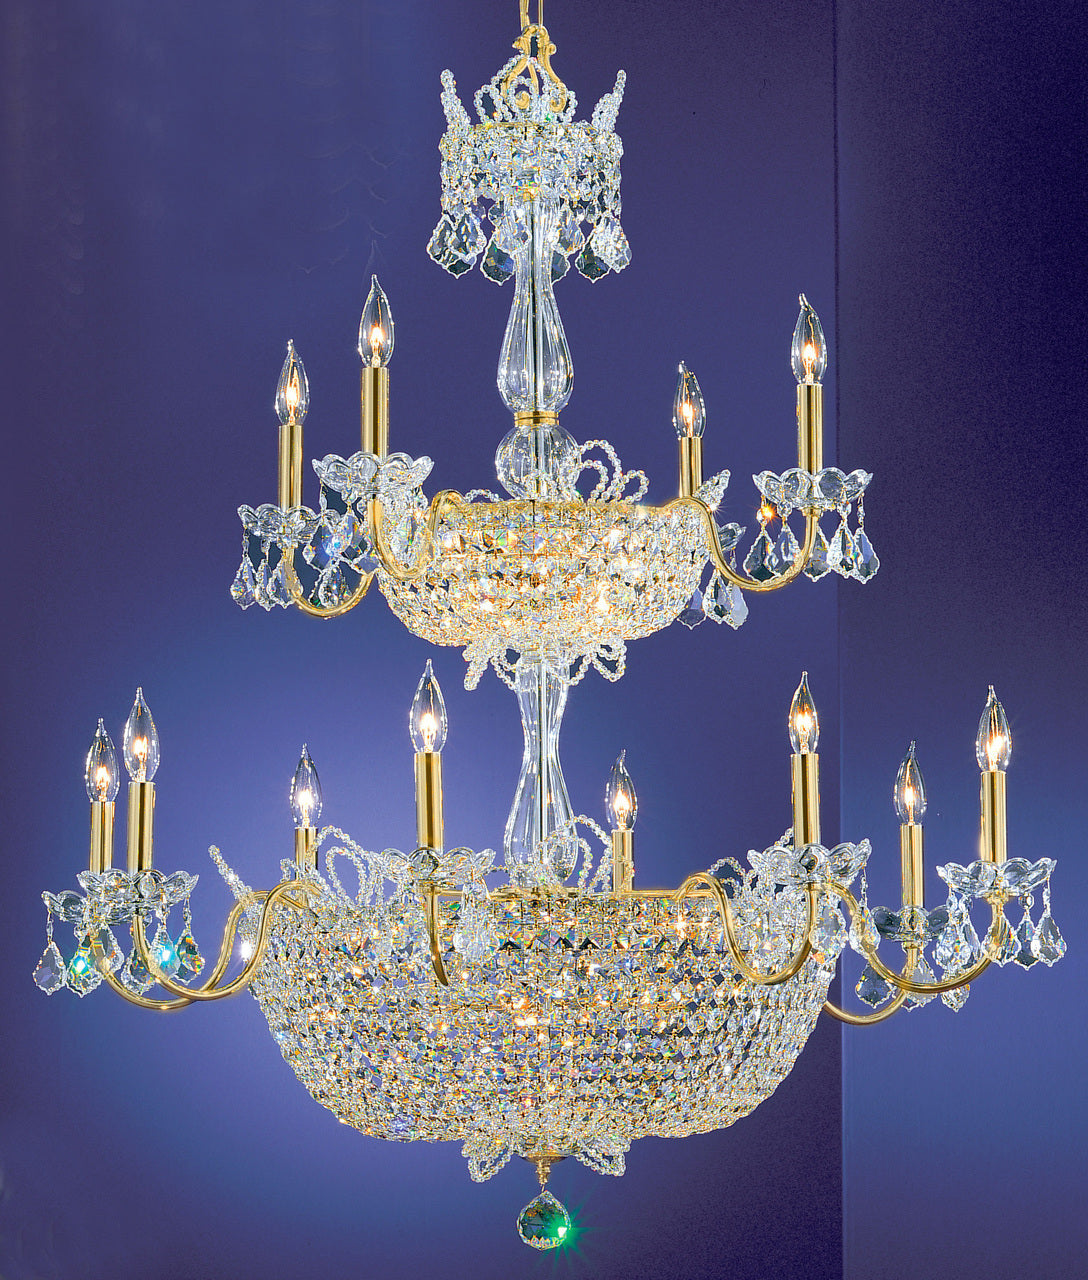 Classic Lighting 69789 GP CP Crown Jewels Crystal Chandelier in Gold